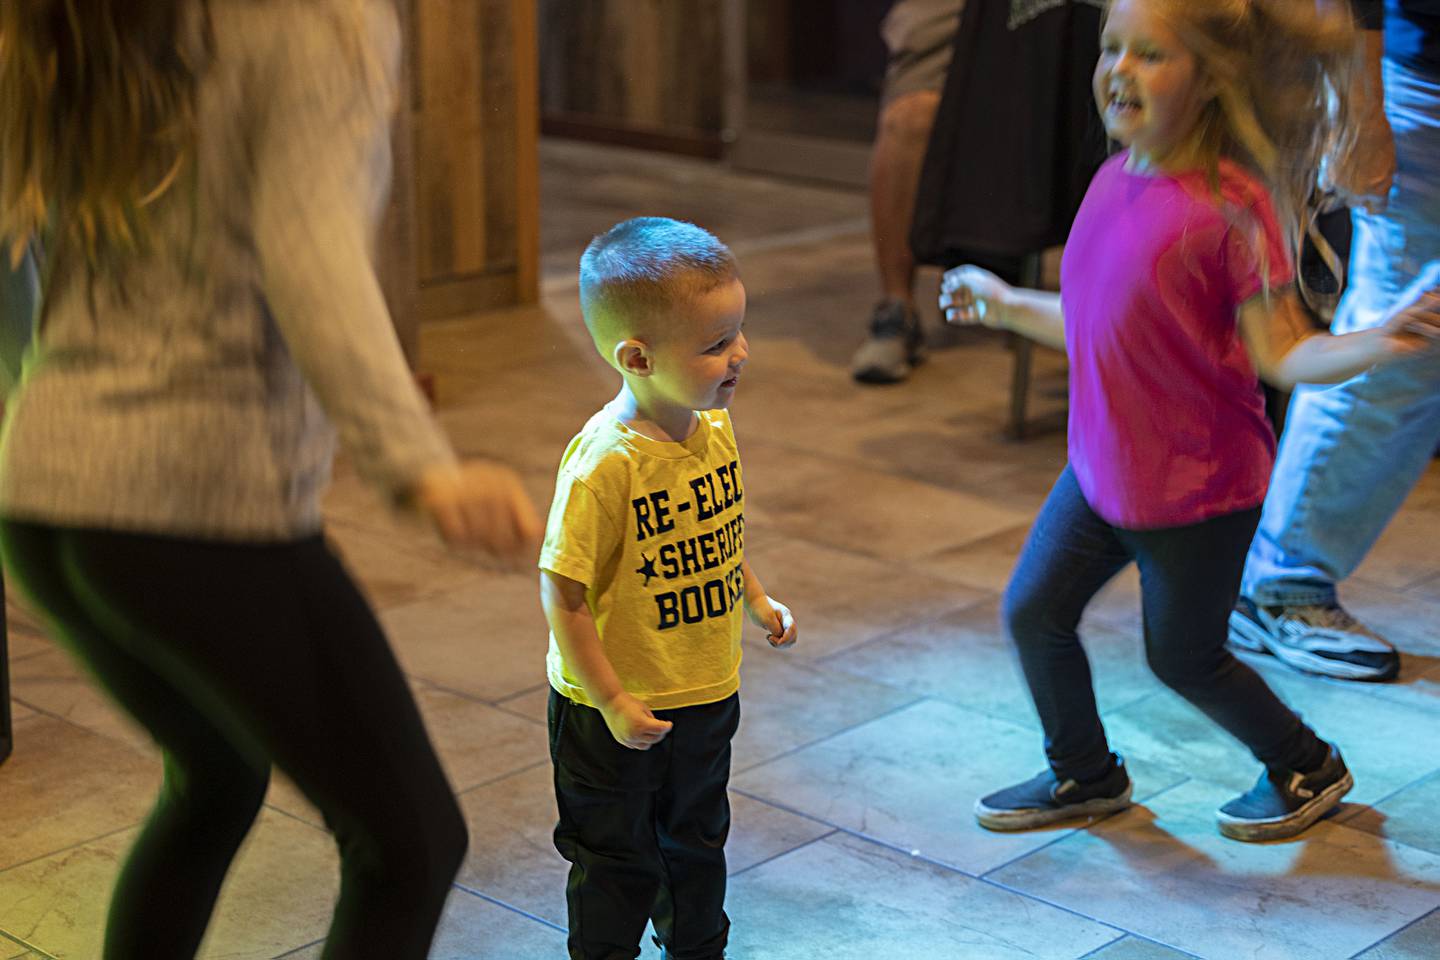 Kids dance at John Booker’s election party Tuesday, Nov. 8, 2022.